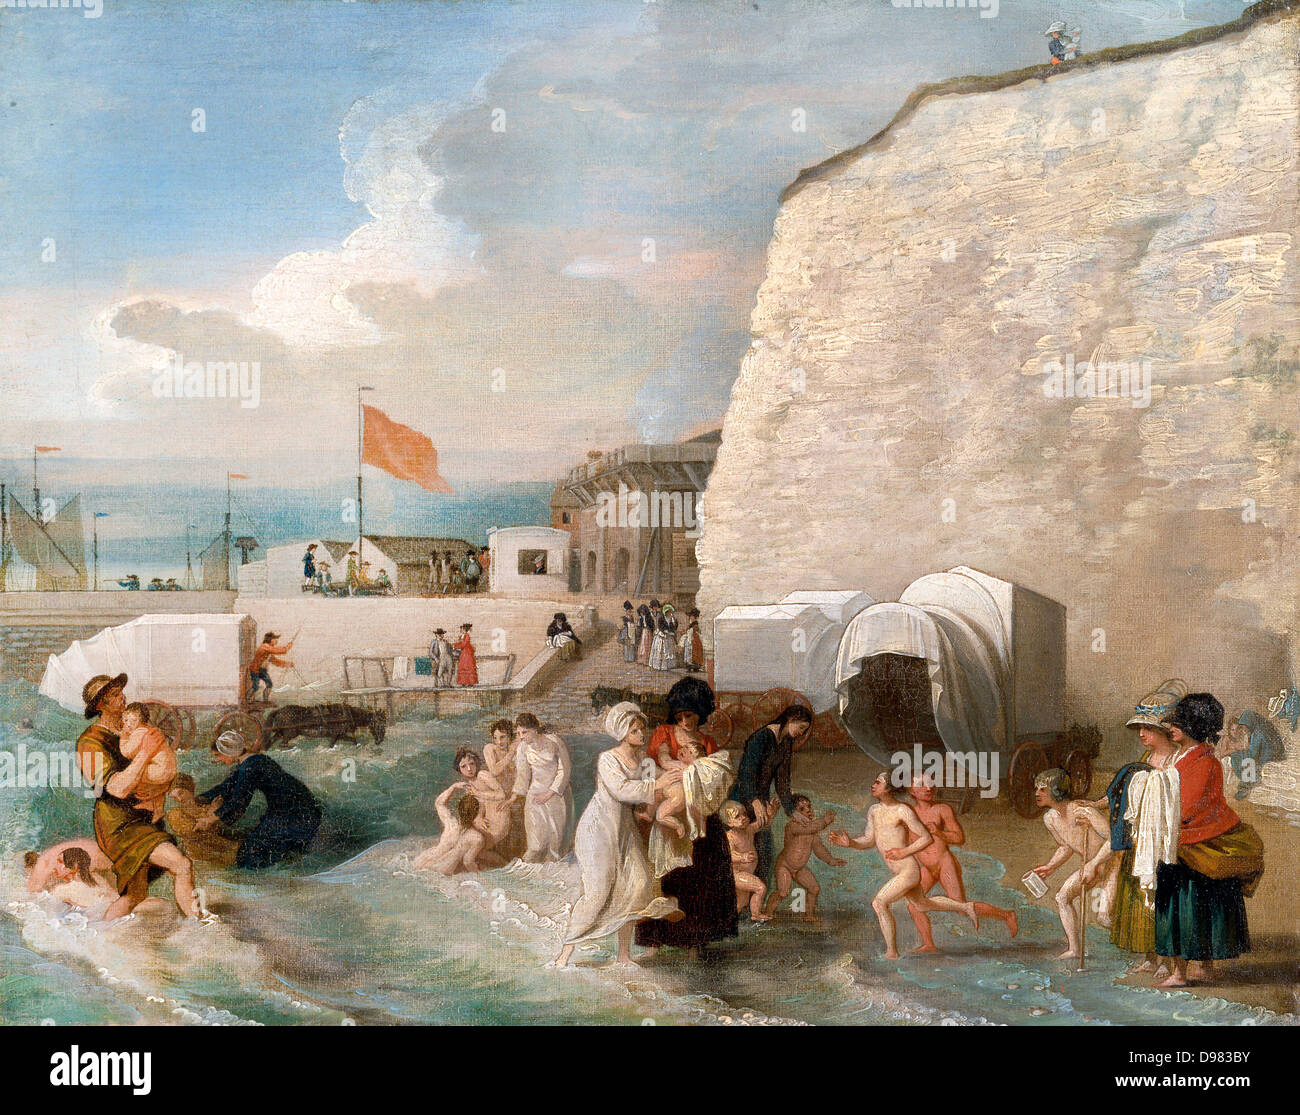 Benjamin West, The Bathing Place at Ramsgate Circa 1788. Oil on canvas. Yale Center for British Art, New Haven, Connecticut, USA Stock Photo